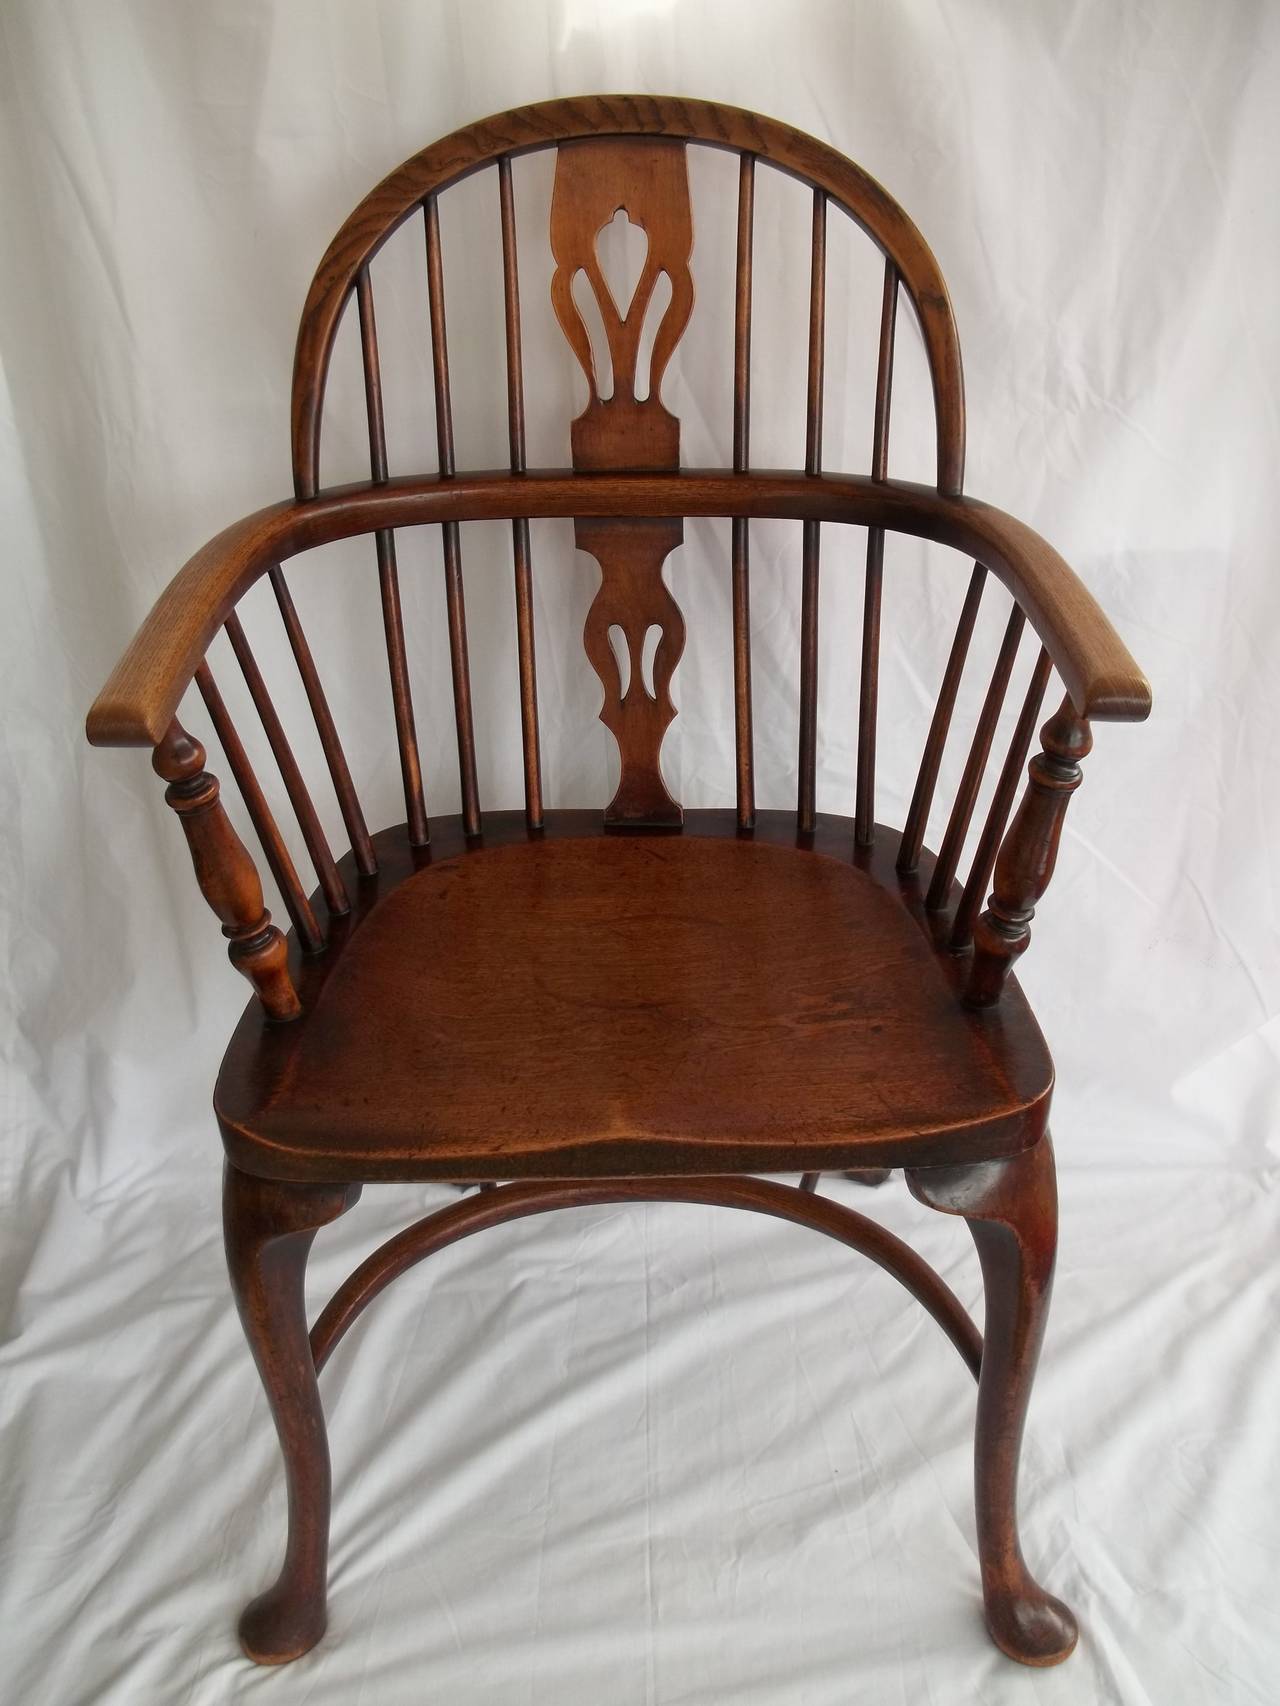 This is a good quality Country WINDSOR Arm Chair, made in England, possibly Thames Valley, in the mid 19th Century, or slightly earlier.

This chair has many good features with well carved high cabriole front legs and a crinoline stretcher. All